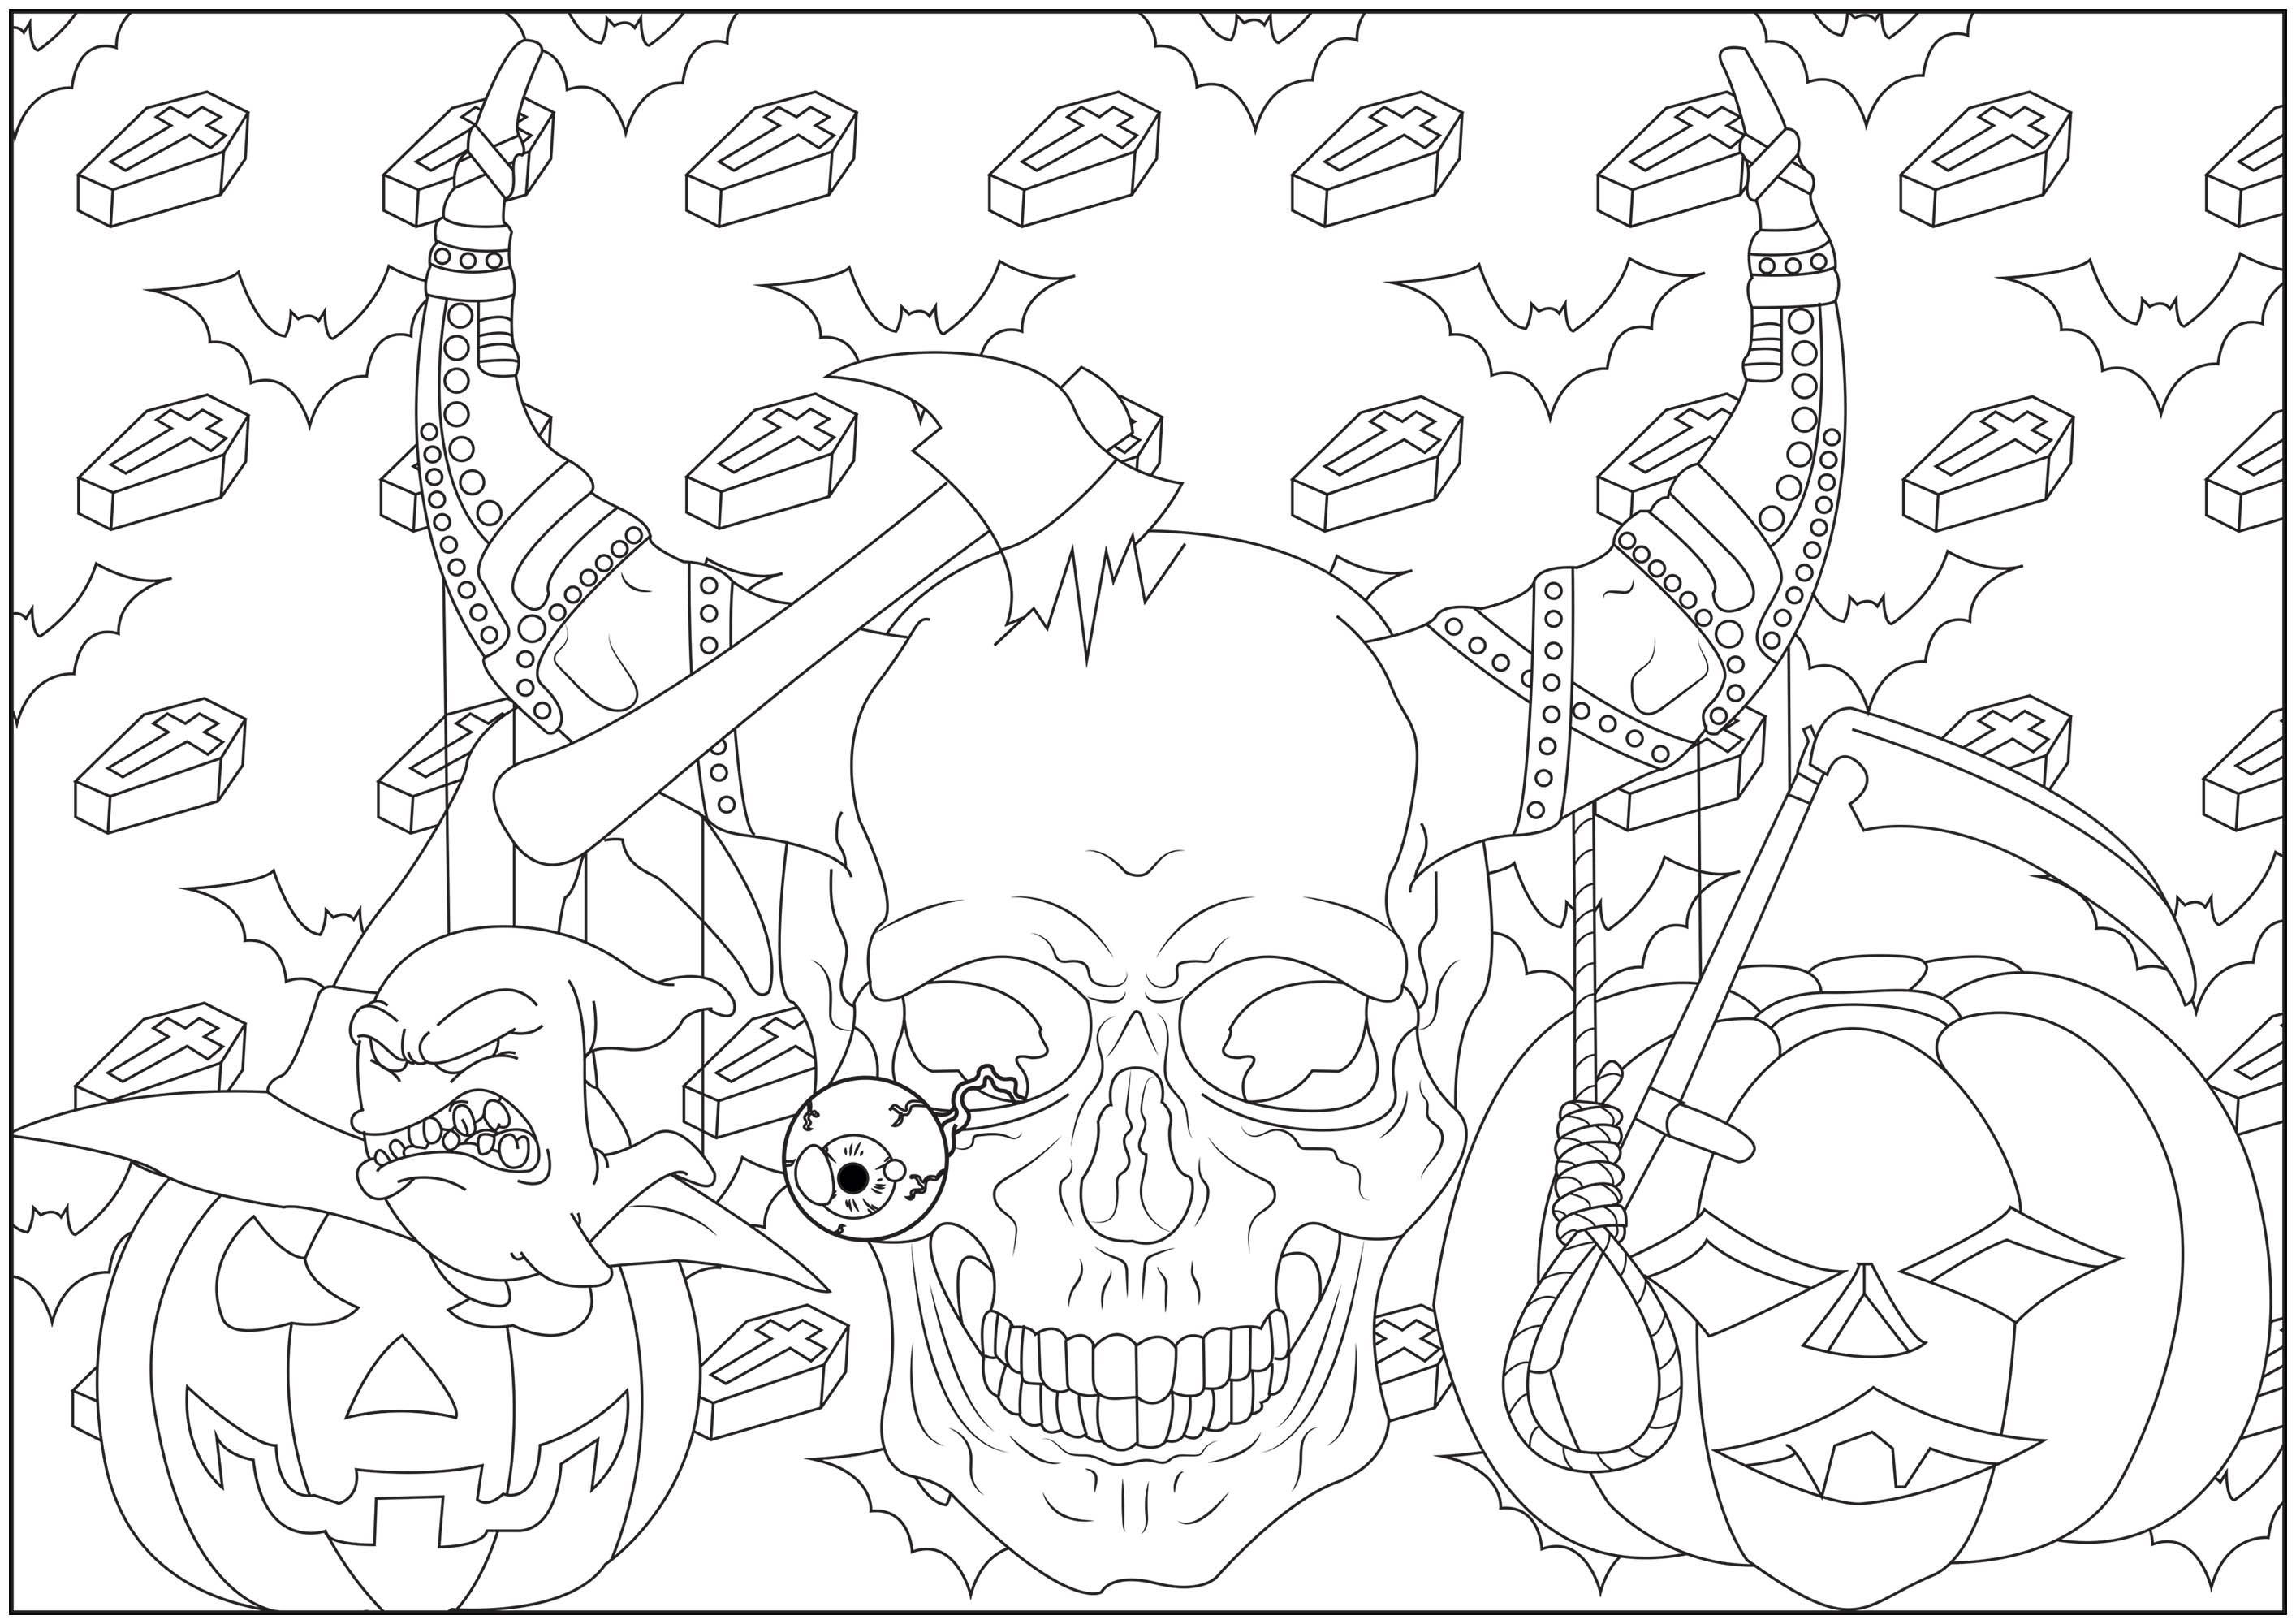 Download Skull - Coloring Pages for Adults